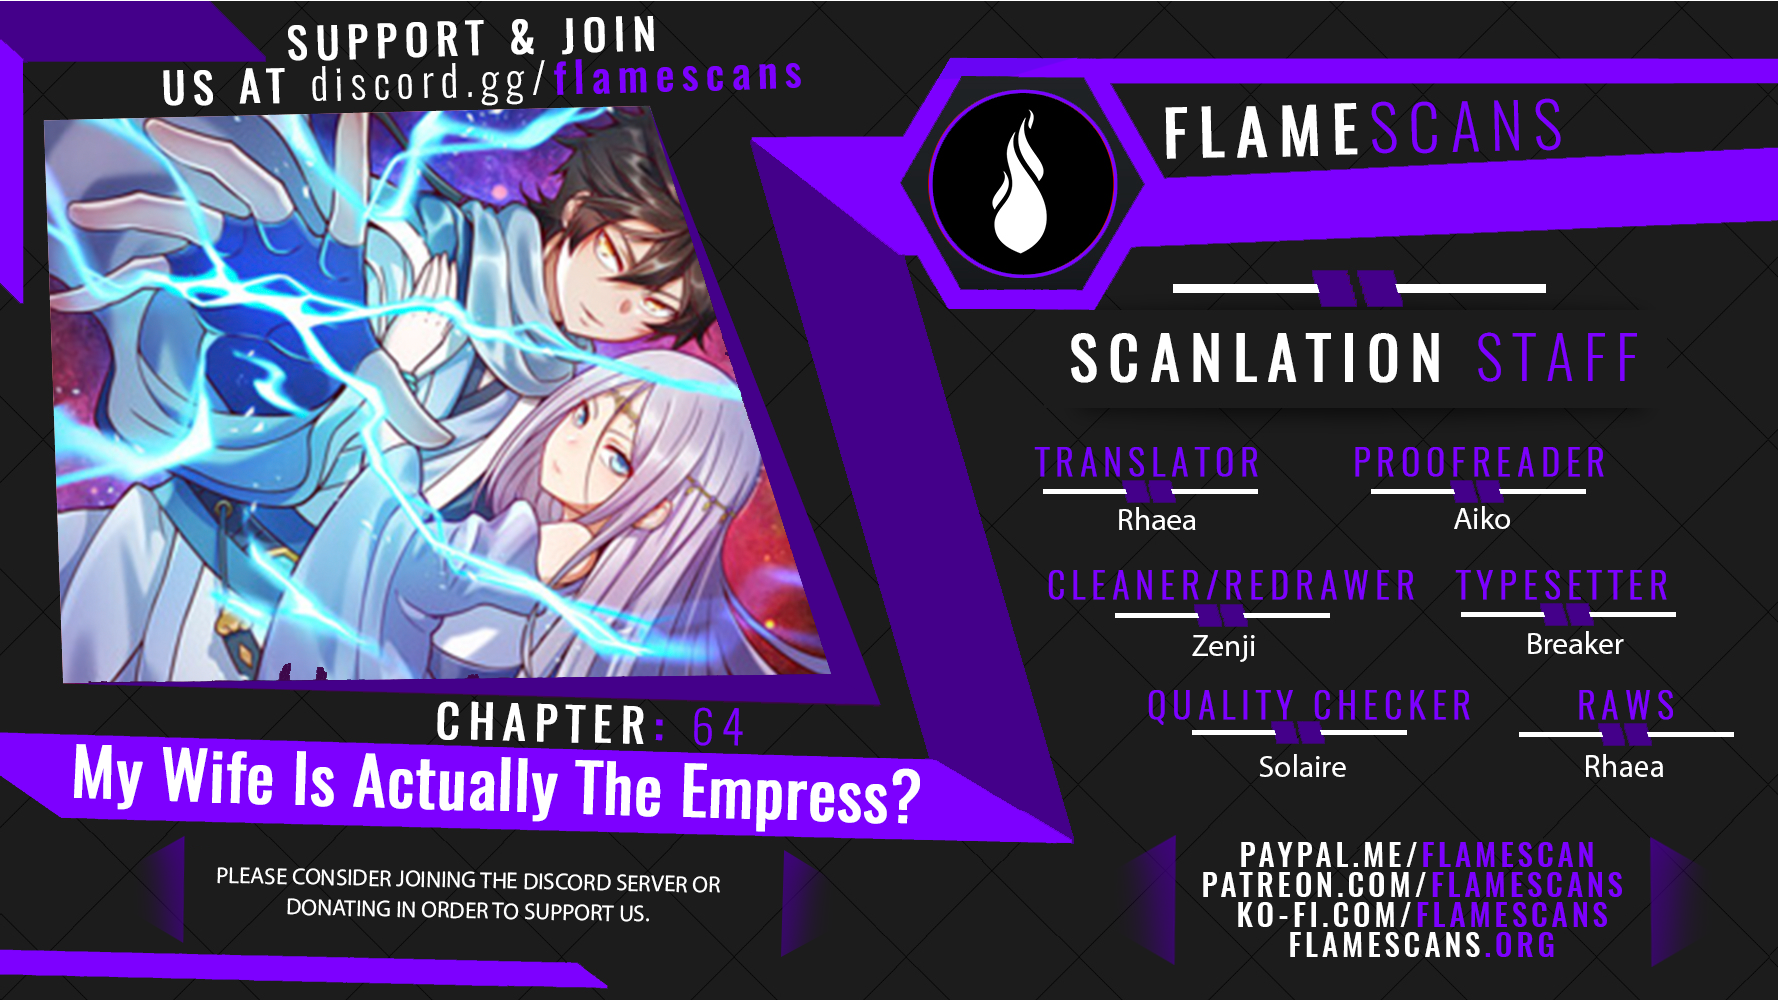 My Wife Is Actually The Empress? - Chapter 14173 - Image 1